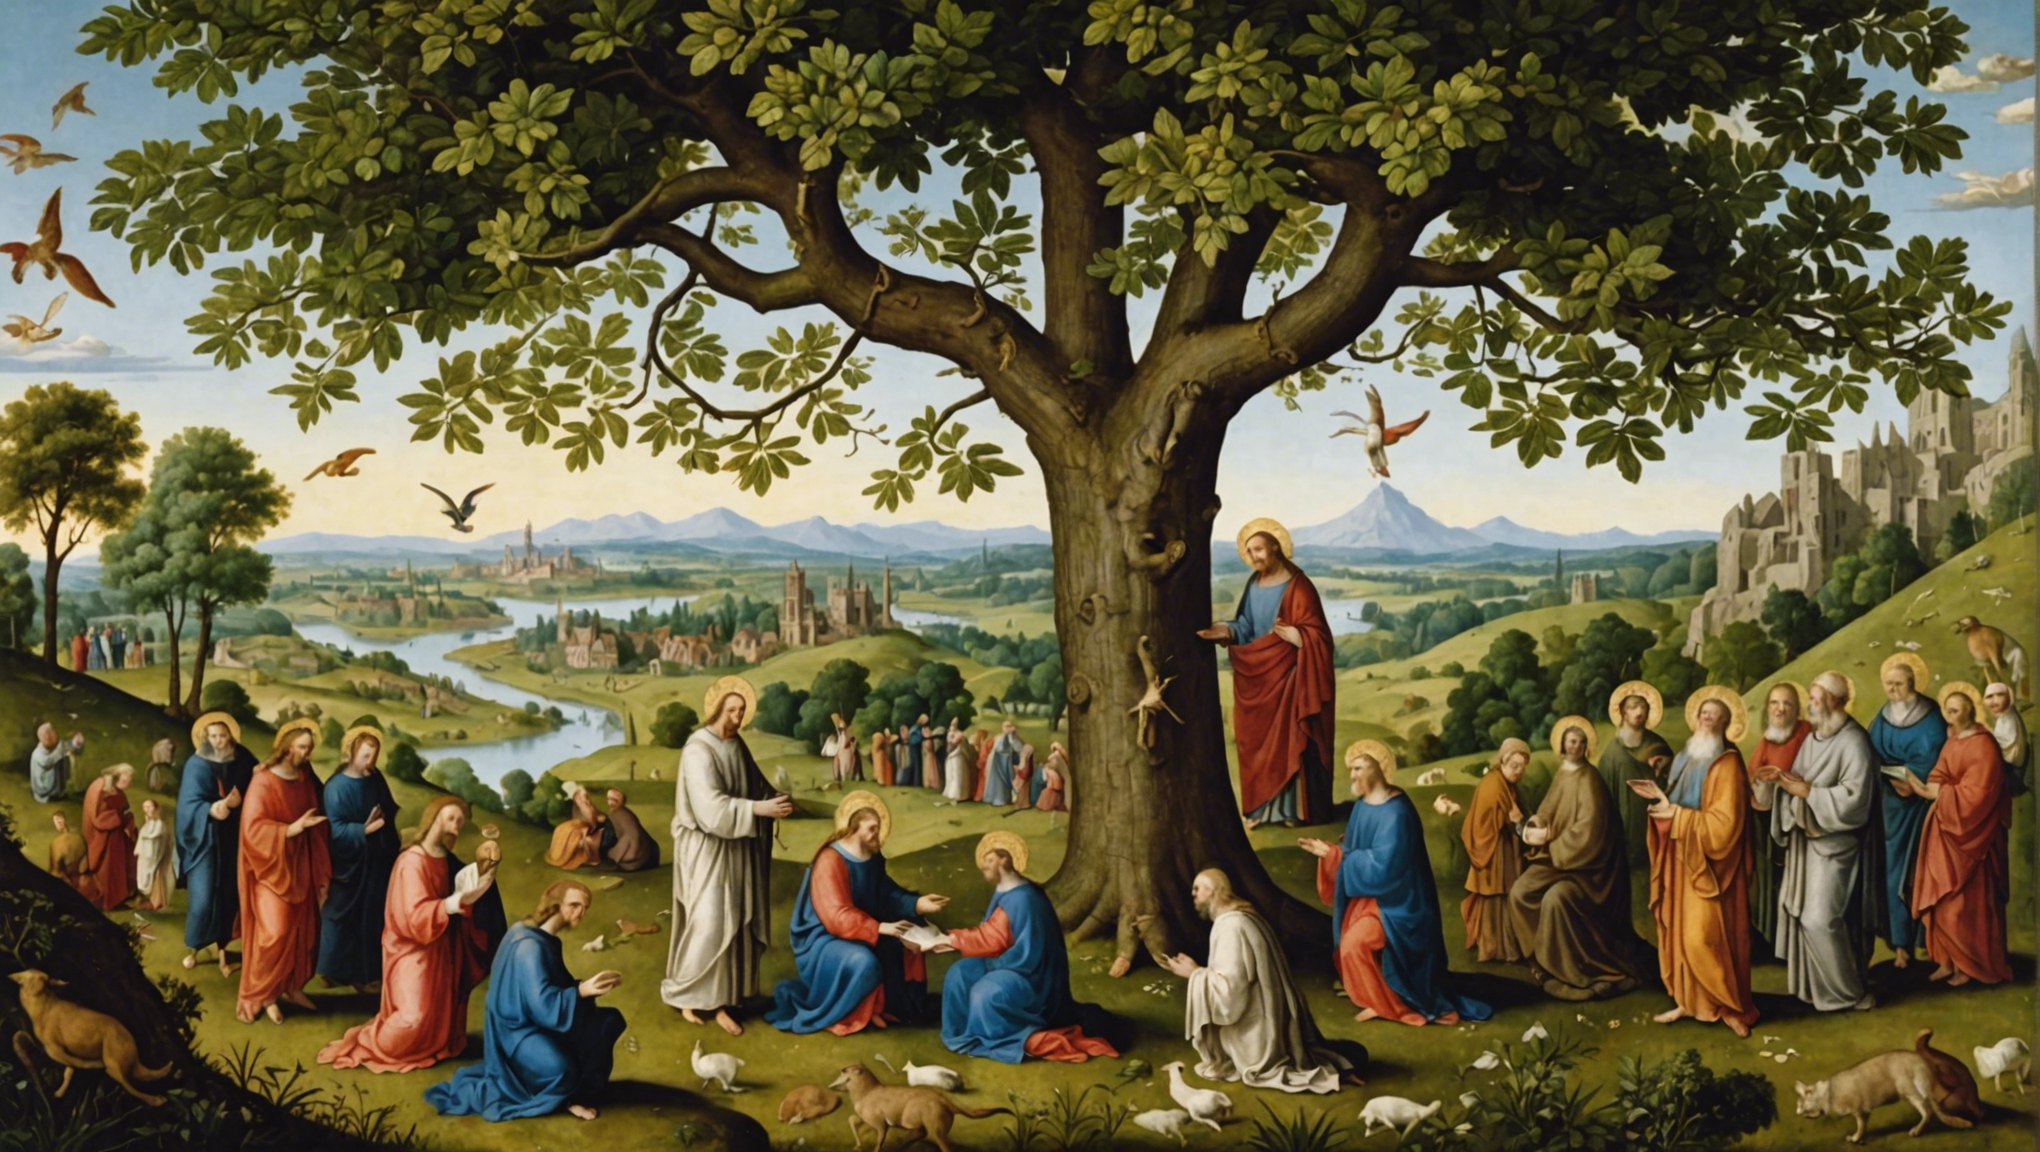 the creation story examines the influence of theology on ecology, delving into the interconnected relationship between religious beliefs and environmental attitudes.